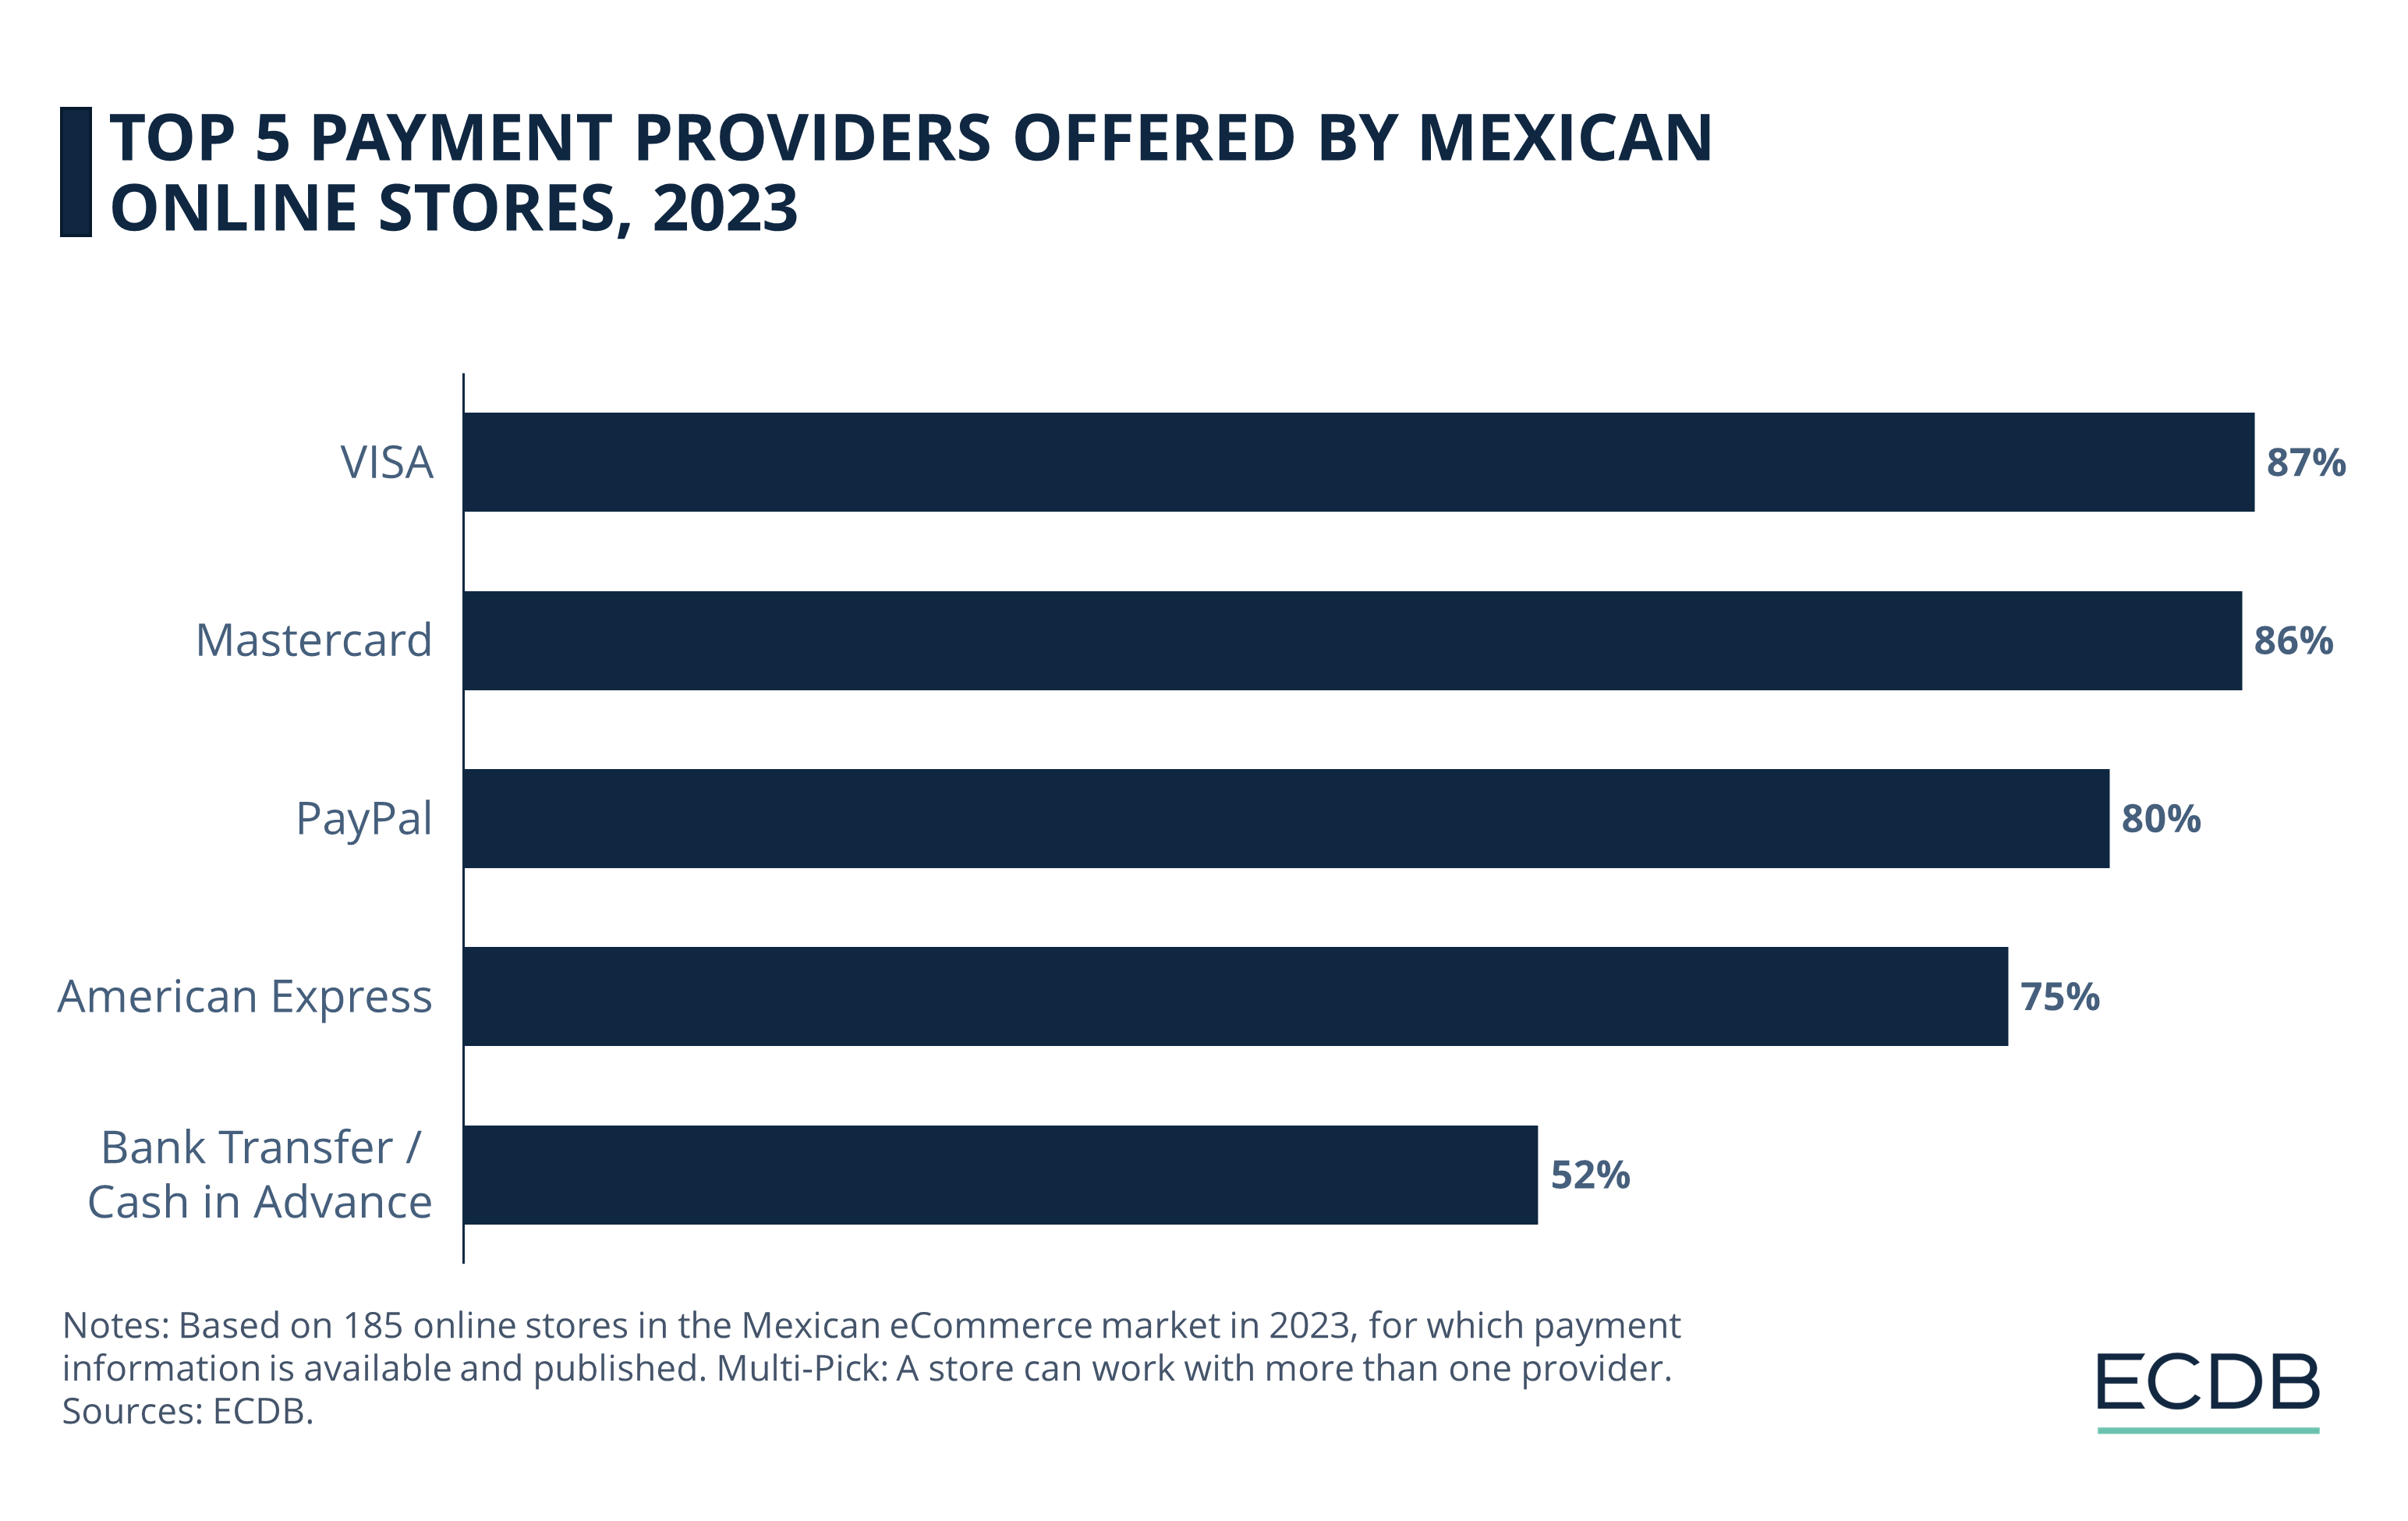 Top 5 Payment Providers Offered by Mexican Online Stores, 2023